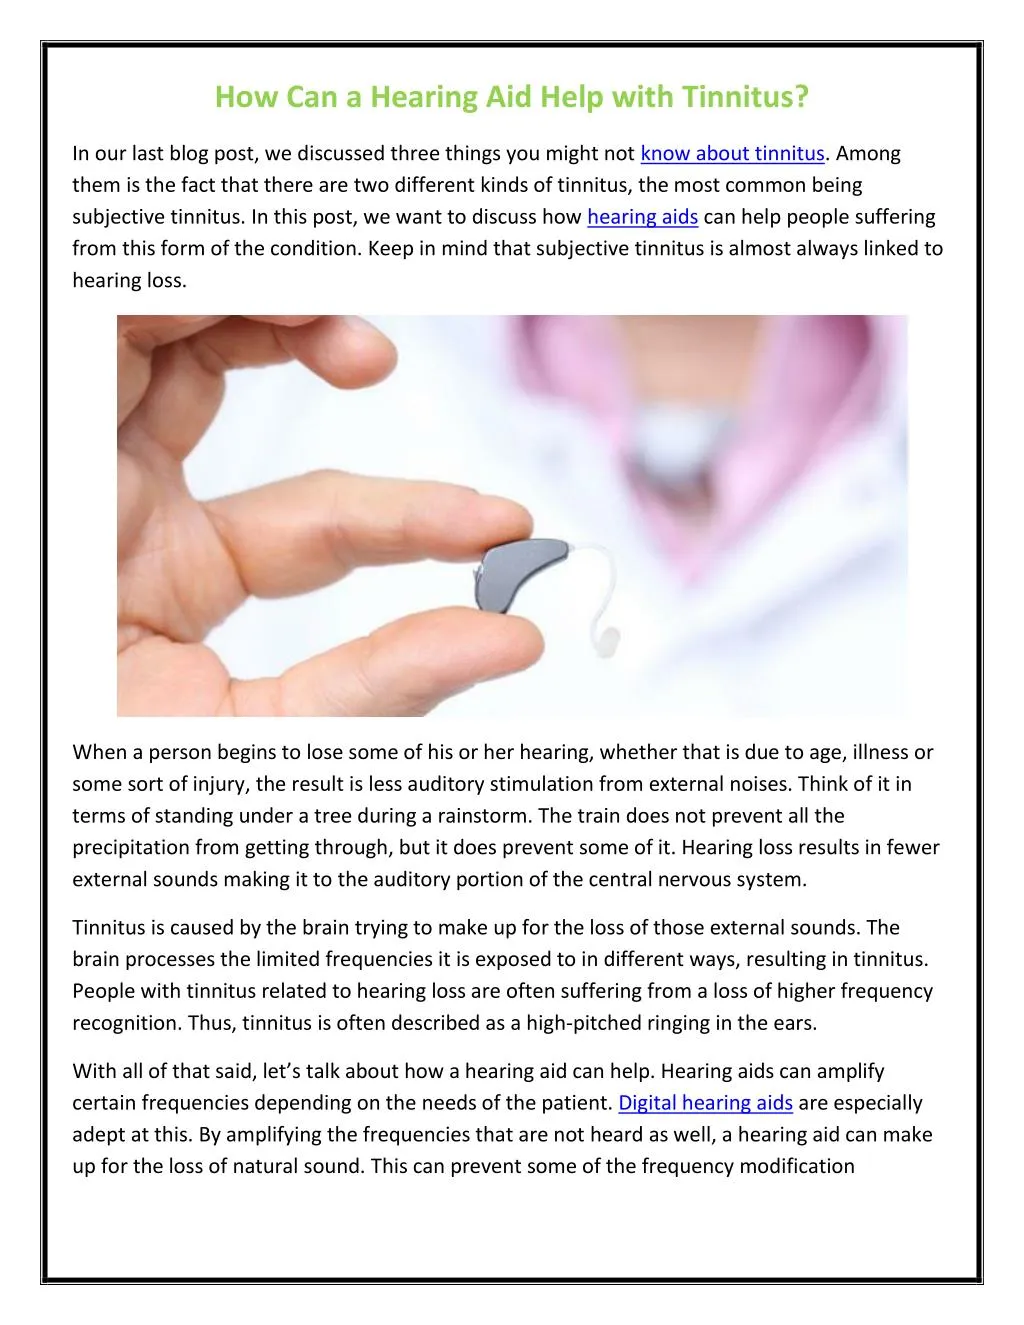 how can a hearing aid help with tinnitus